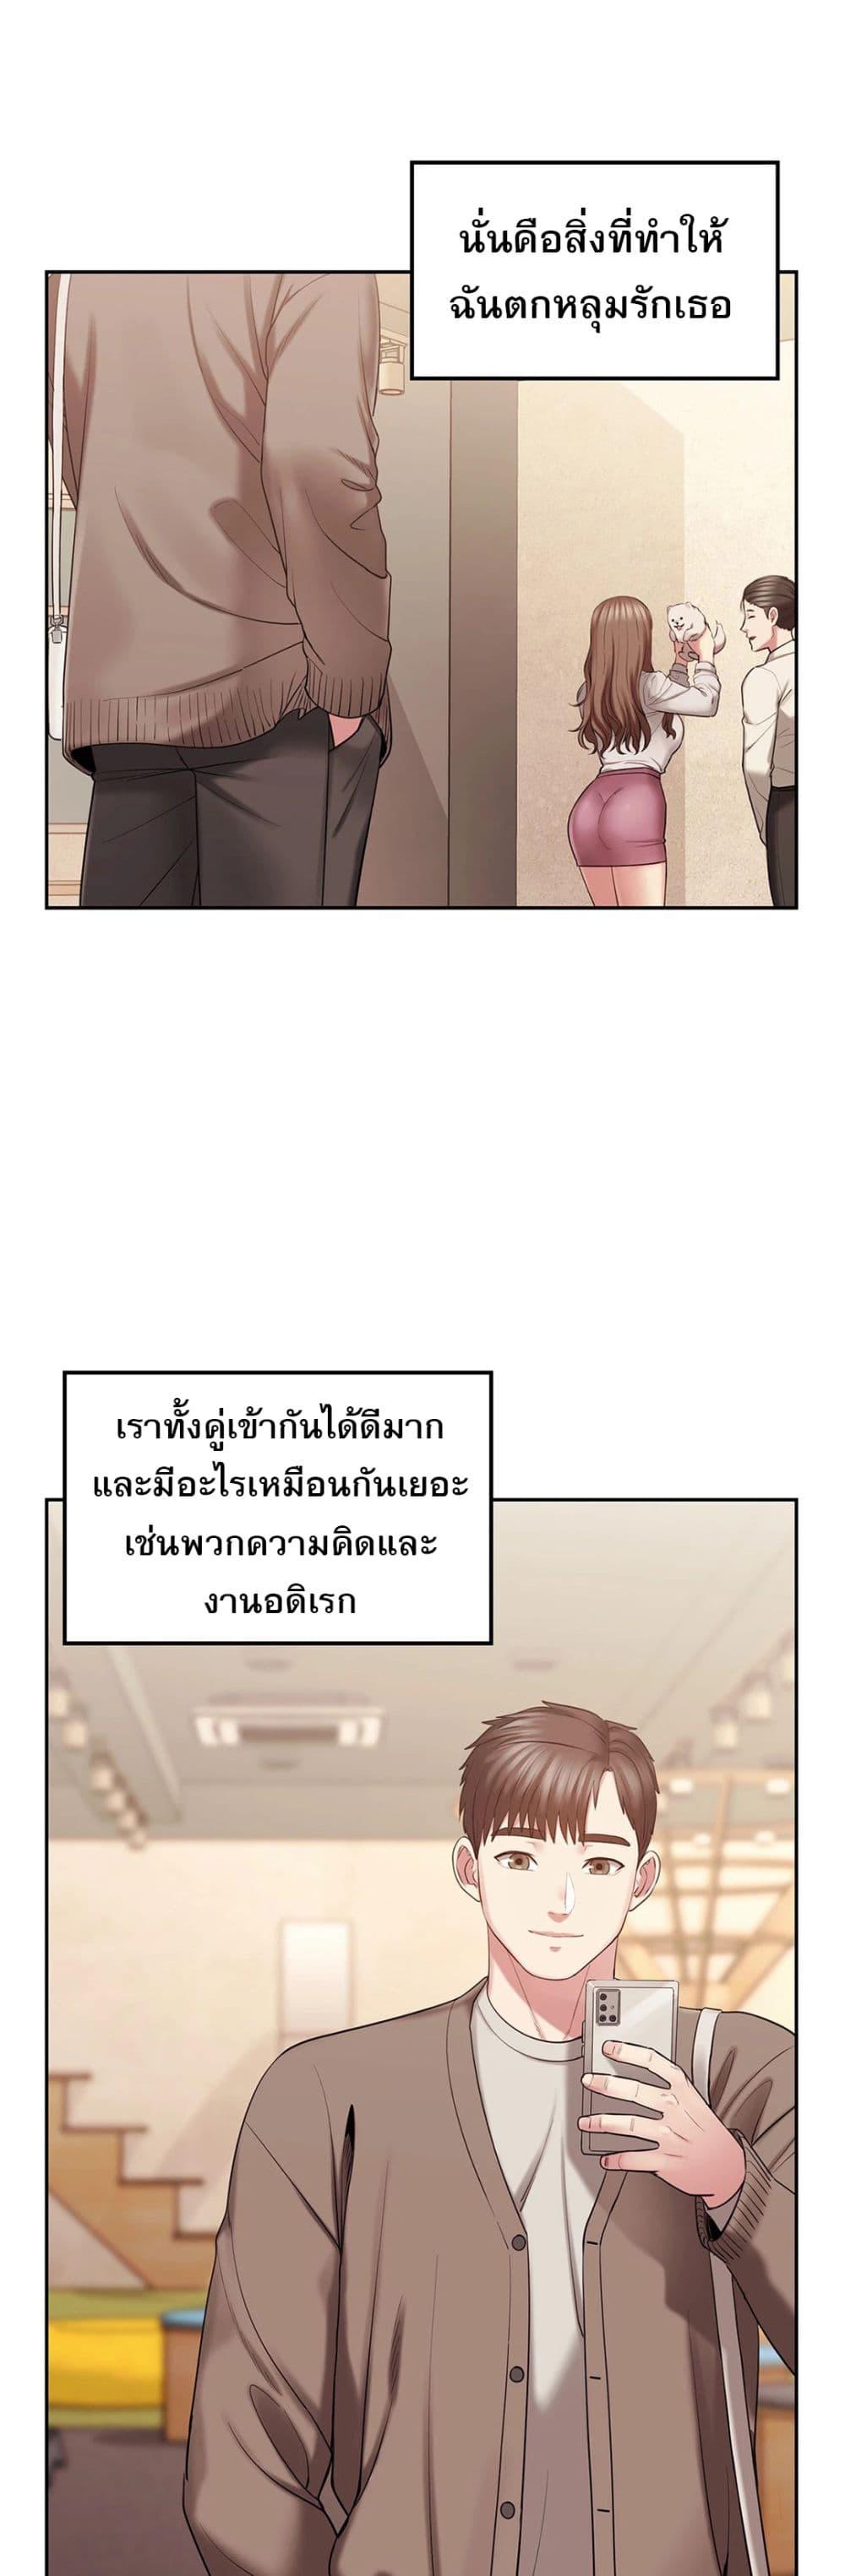 Sexual Consulting 1 ภาพ 3